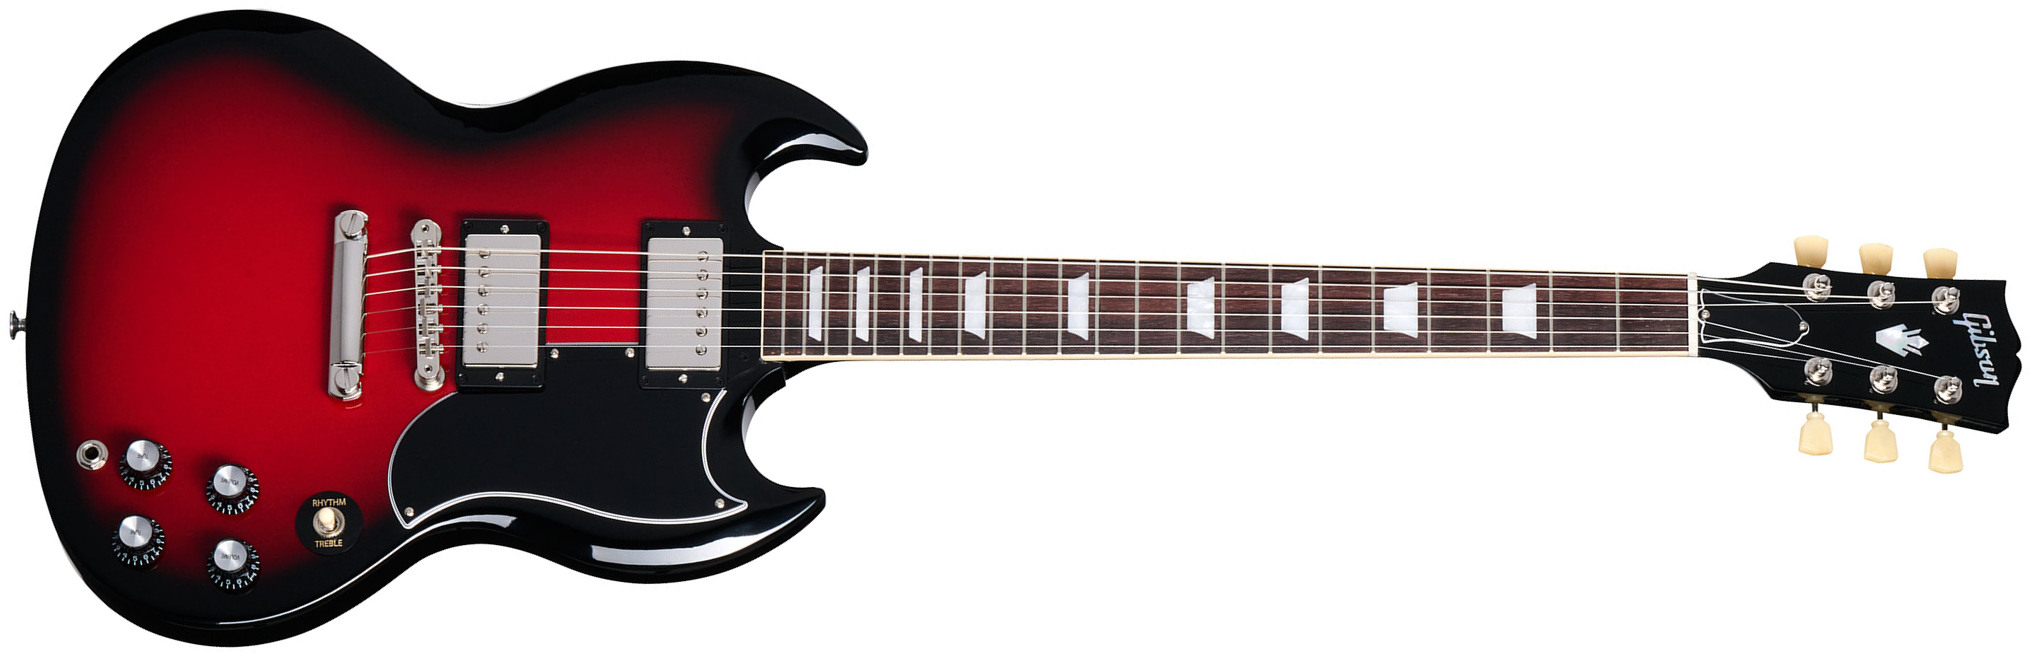 Gibson Sg Standard 1961 Custom Color 2h Ht Rw - Cardinal Red Burst - Double cut electric guitar - Main picture